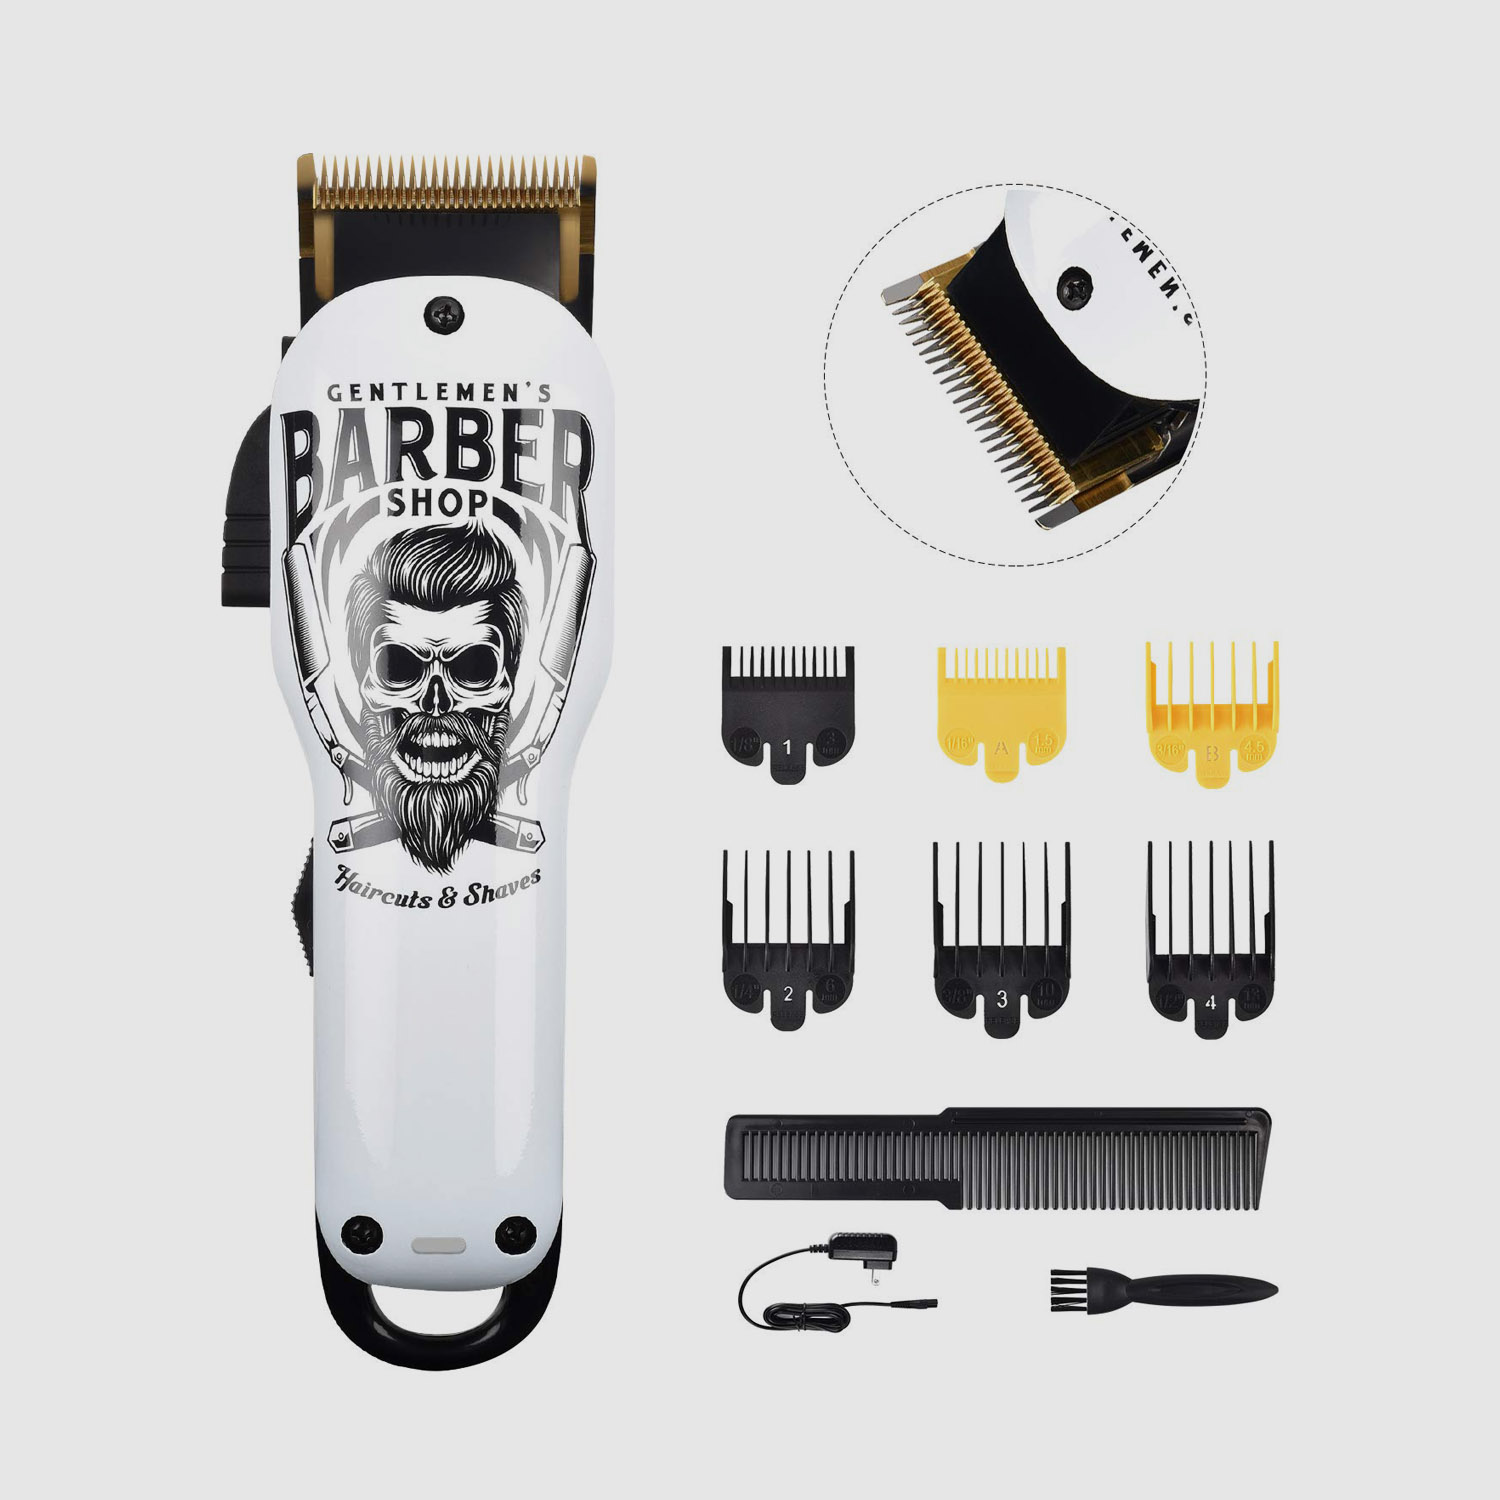 How do you choose the best hair clippers?